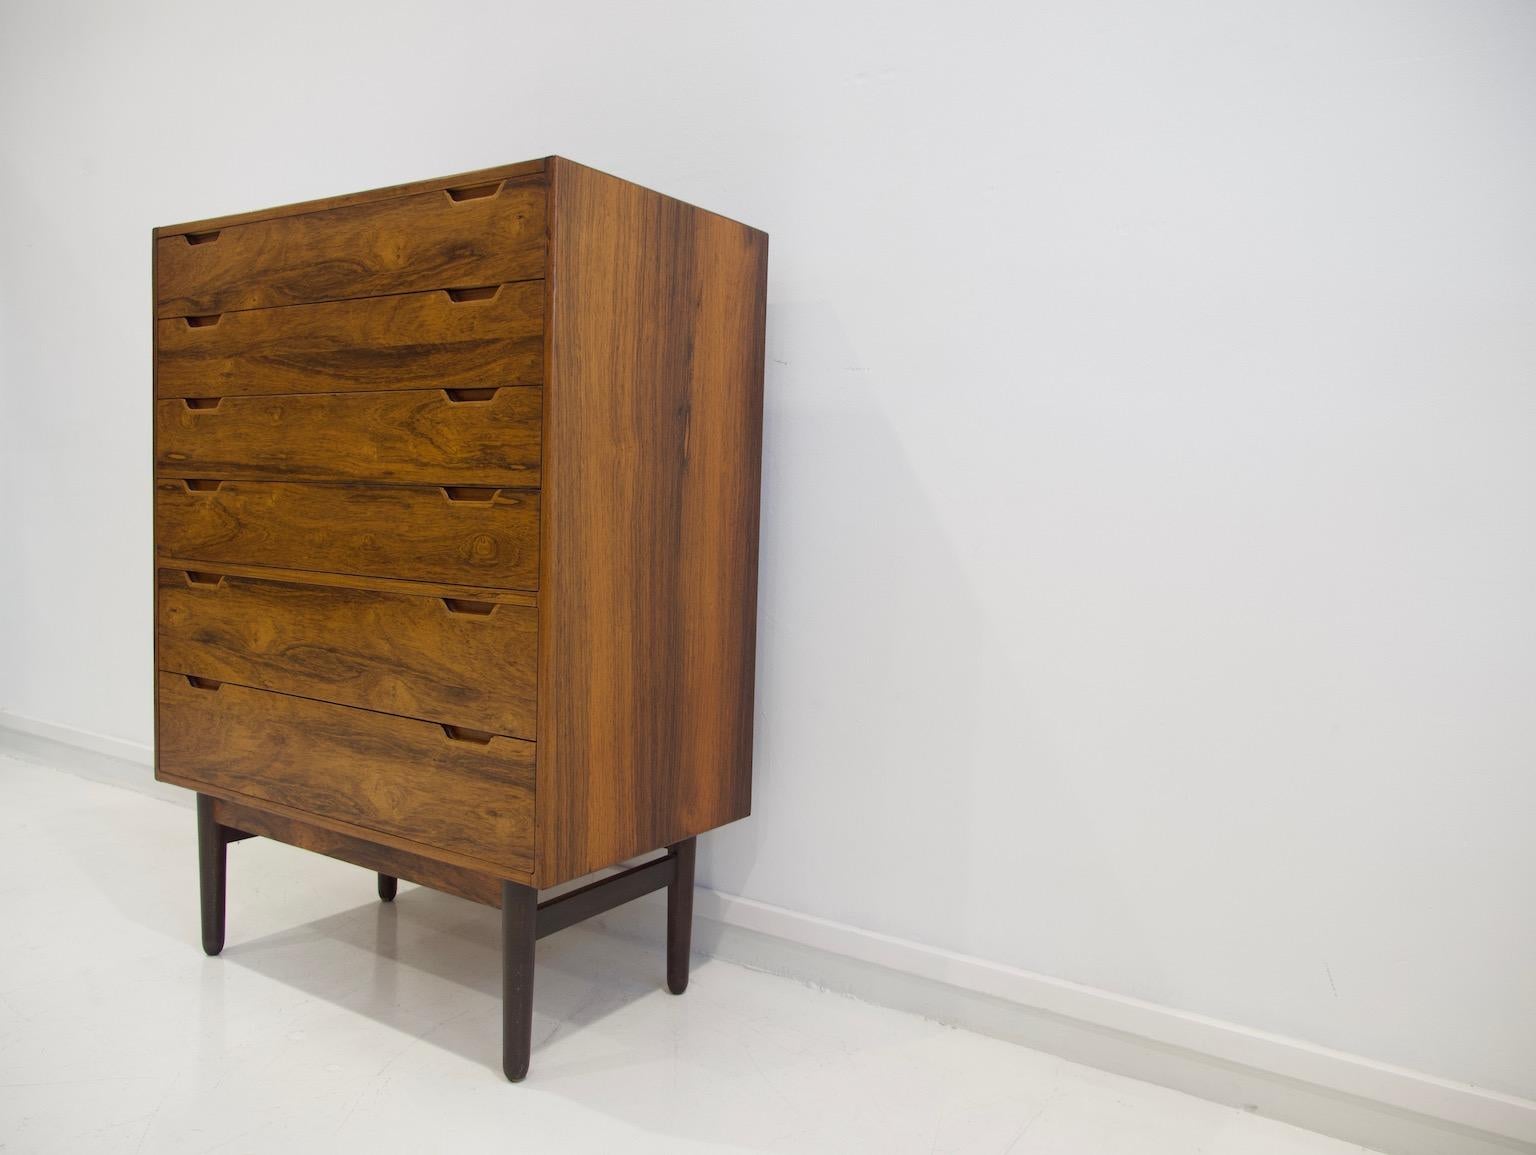 Dresser made of hardwood designed by Svend Langkilde in circa 1960s. Six drawers with recessed pulls, mahogany drawer sides and bottoms. Manufactured by Langkilde Møbler.